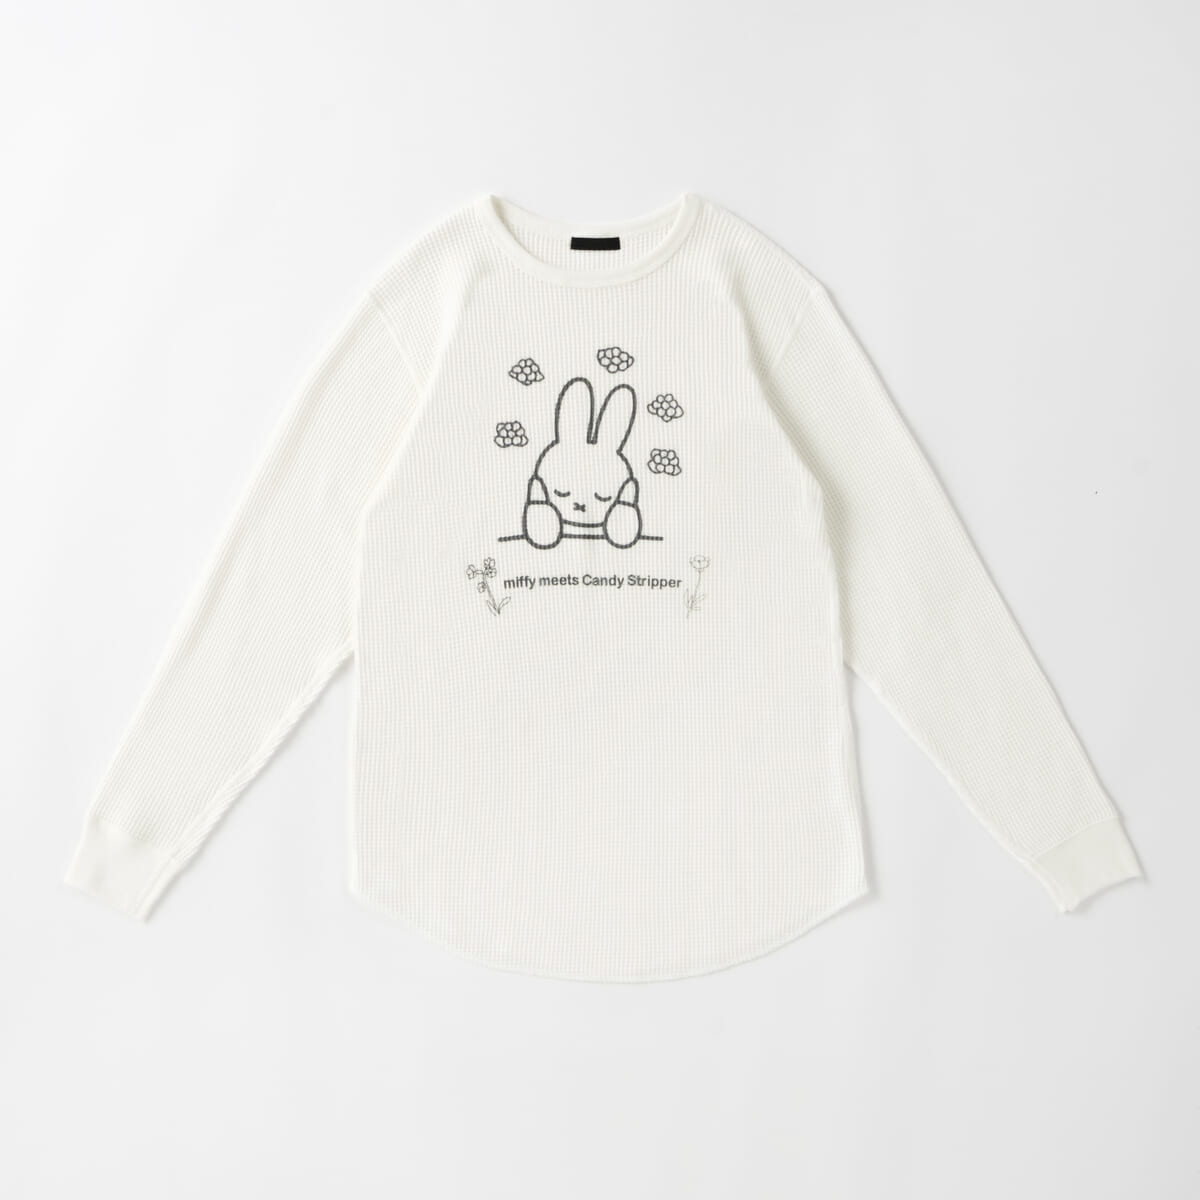 PARCO サマーキャンペーン「ミッフィーと パルコのなつ。」Candy Stripper / MIFFY AND FLOWER WAFFLE L/S TEE